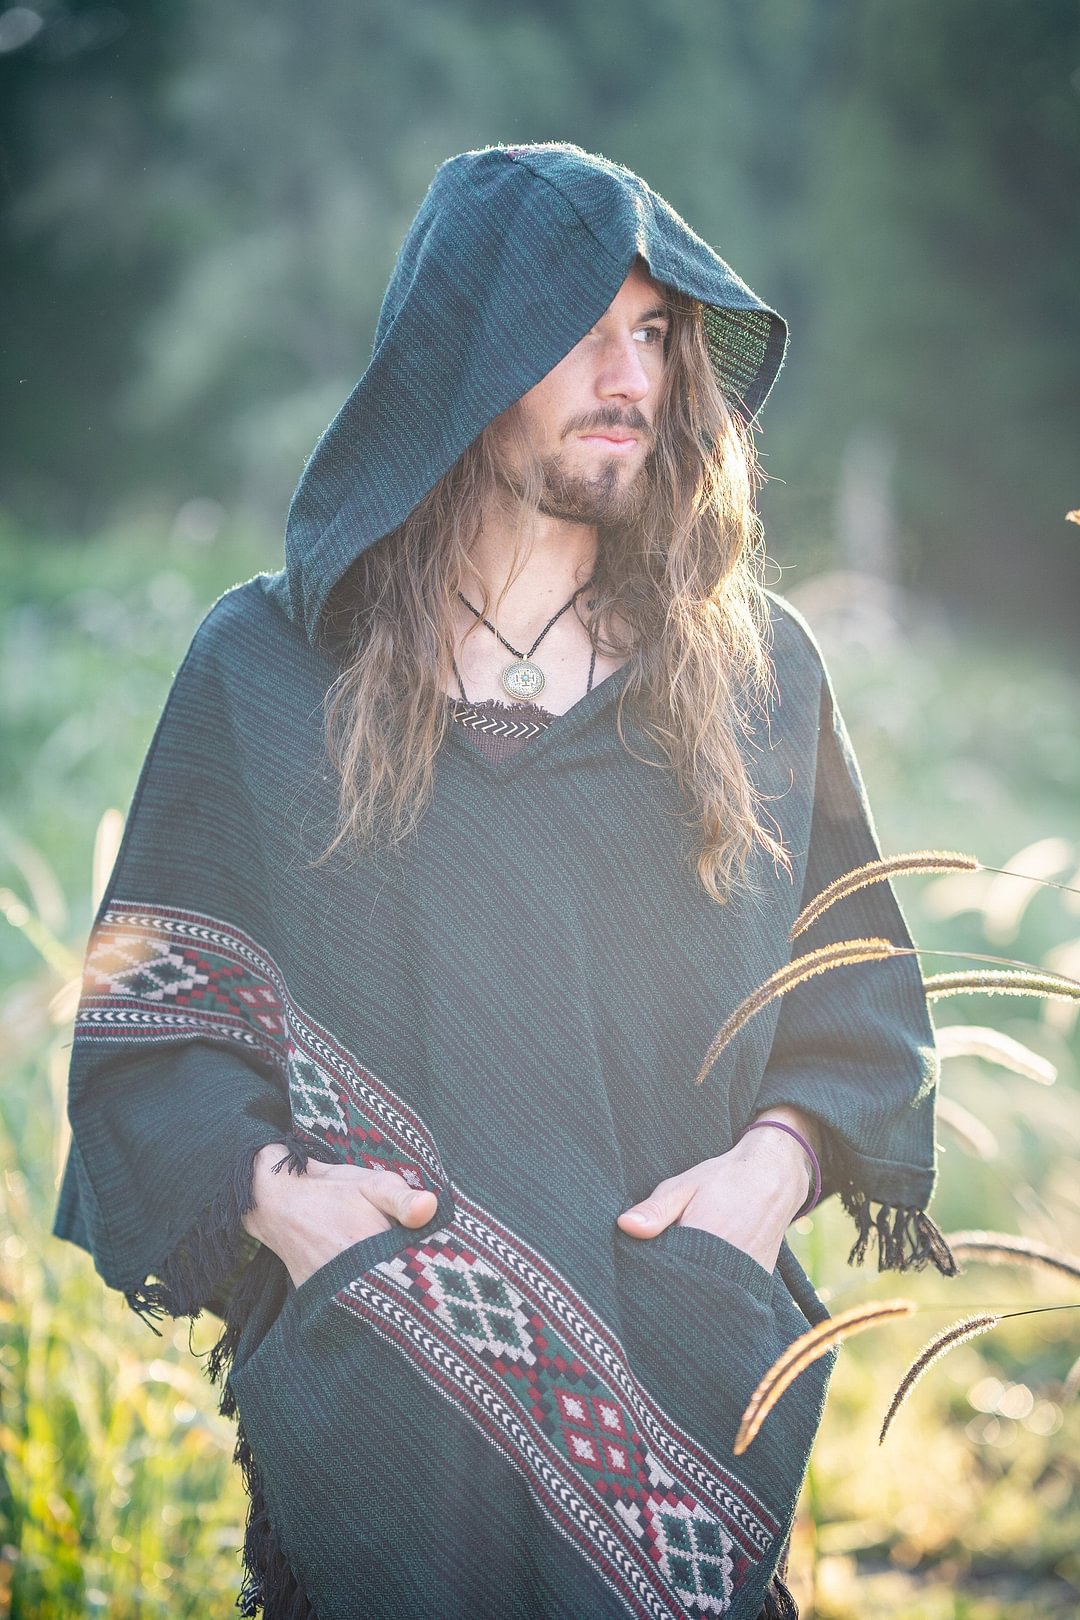 Men's Hooded Poncho Green Cashmere Yak Wool Pockets Tribal Embroidery Celtic Gypsy Alternative Festival Mexican Primitive Large Hood